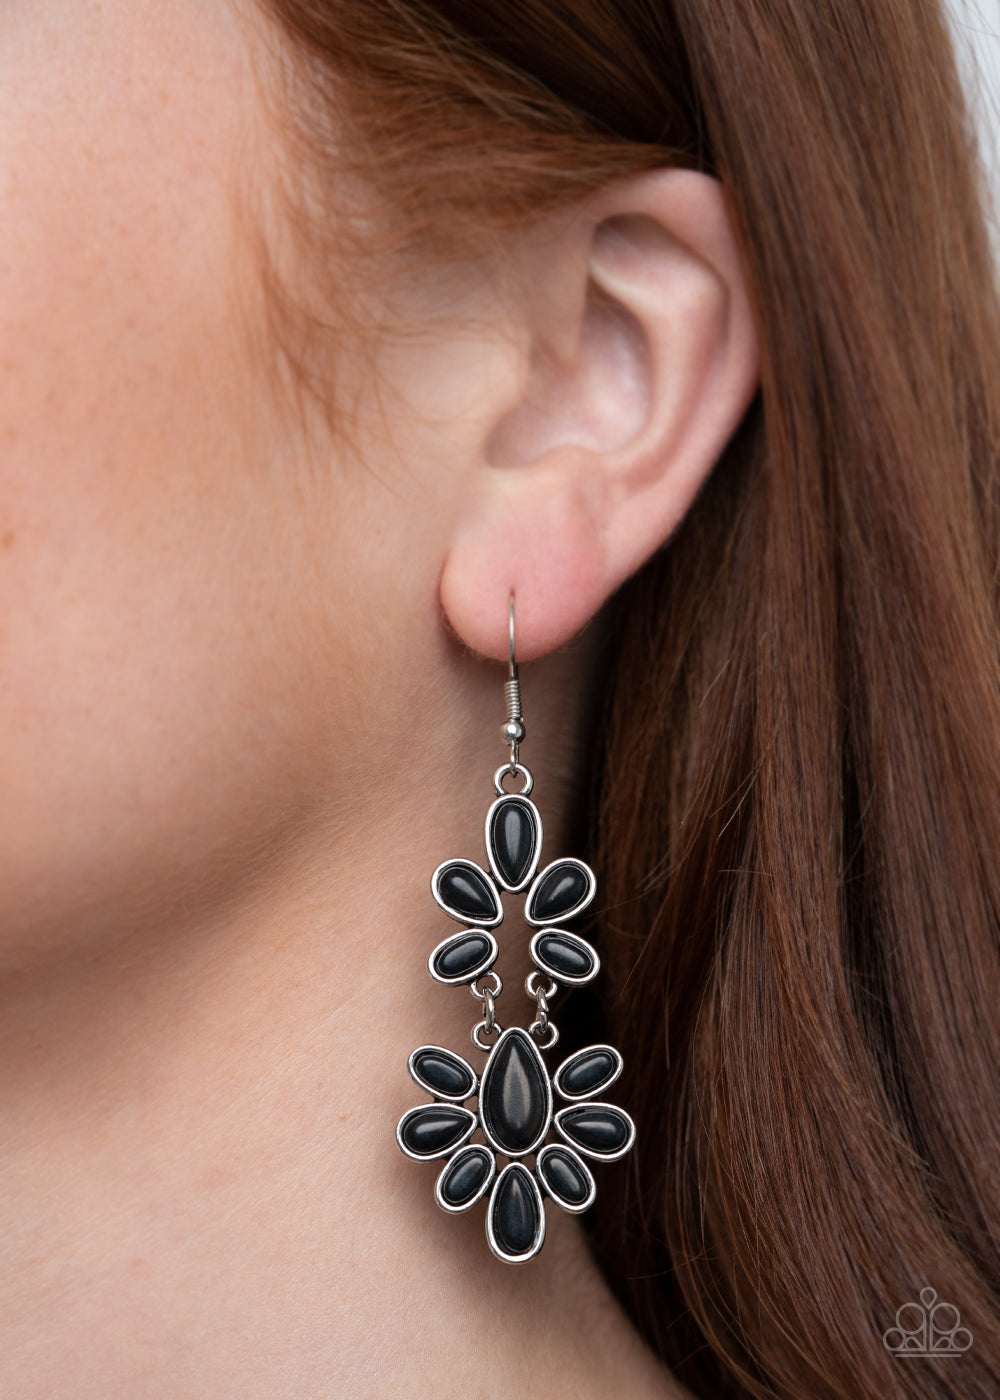 Cactus Cruise - Black and Silver Earrings - Paparazzi Accessories - Sleek silver frames, earthy black stone teardrop frames delicately link into a wildly wonderfully floral stylish earrings.